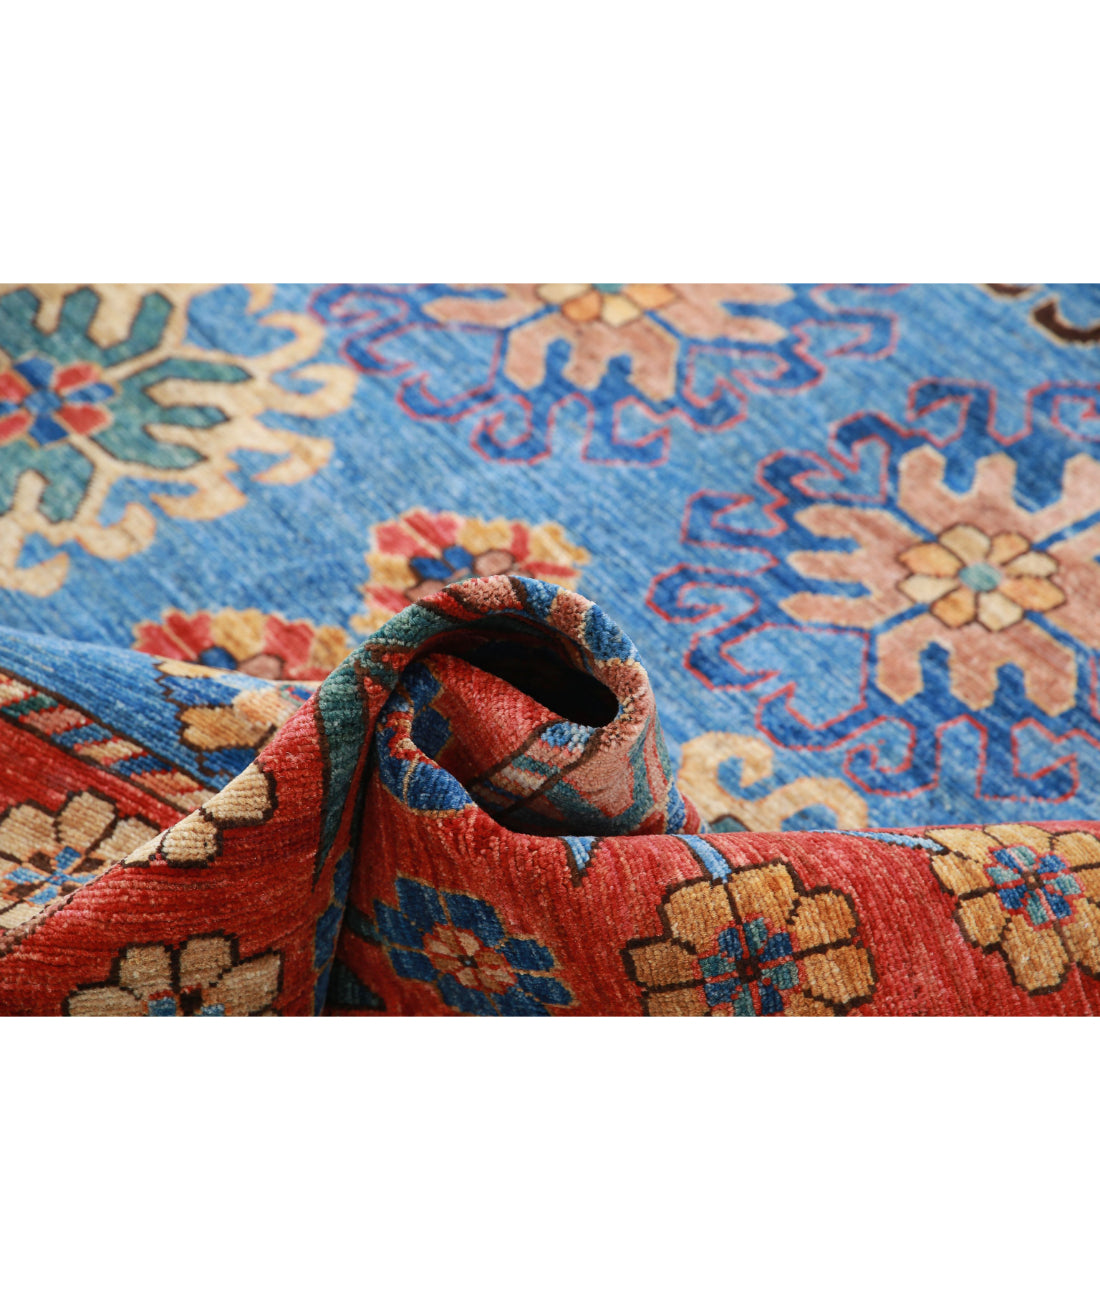 Hand Knotted Nomadic Caucasian Humna Wool Rug - 6'9'' x 10'1'' 6'9'' x 10'1'' (203 X 303) / Blue / Red